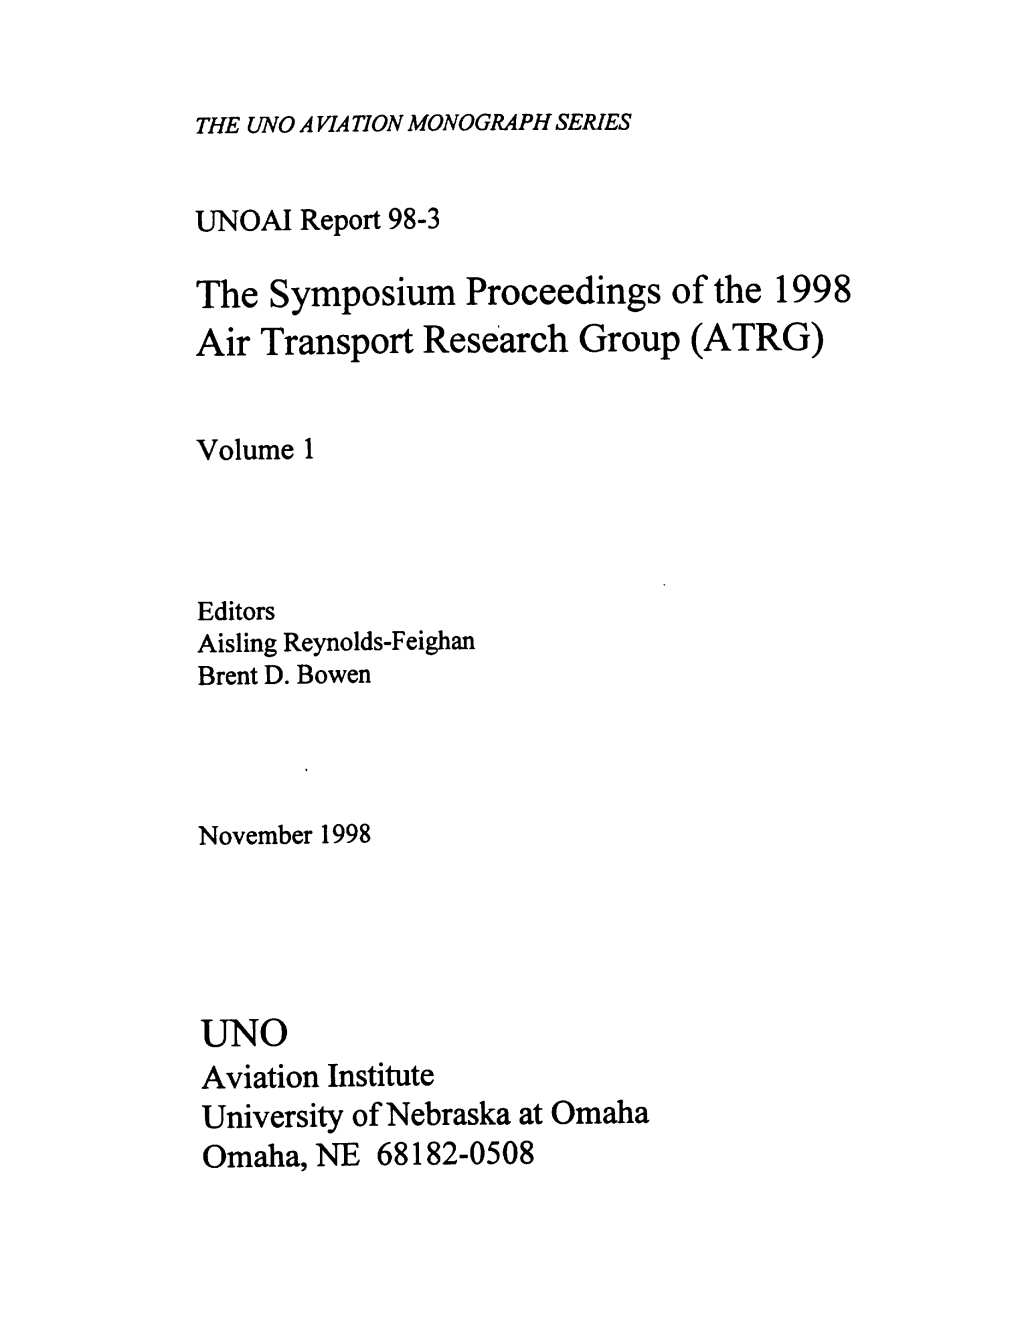 The Symposium Proceedings of the 1998 Air Transport Research Group (ATRG)